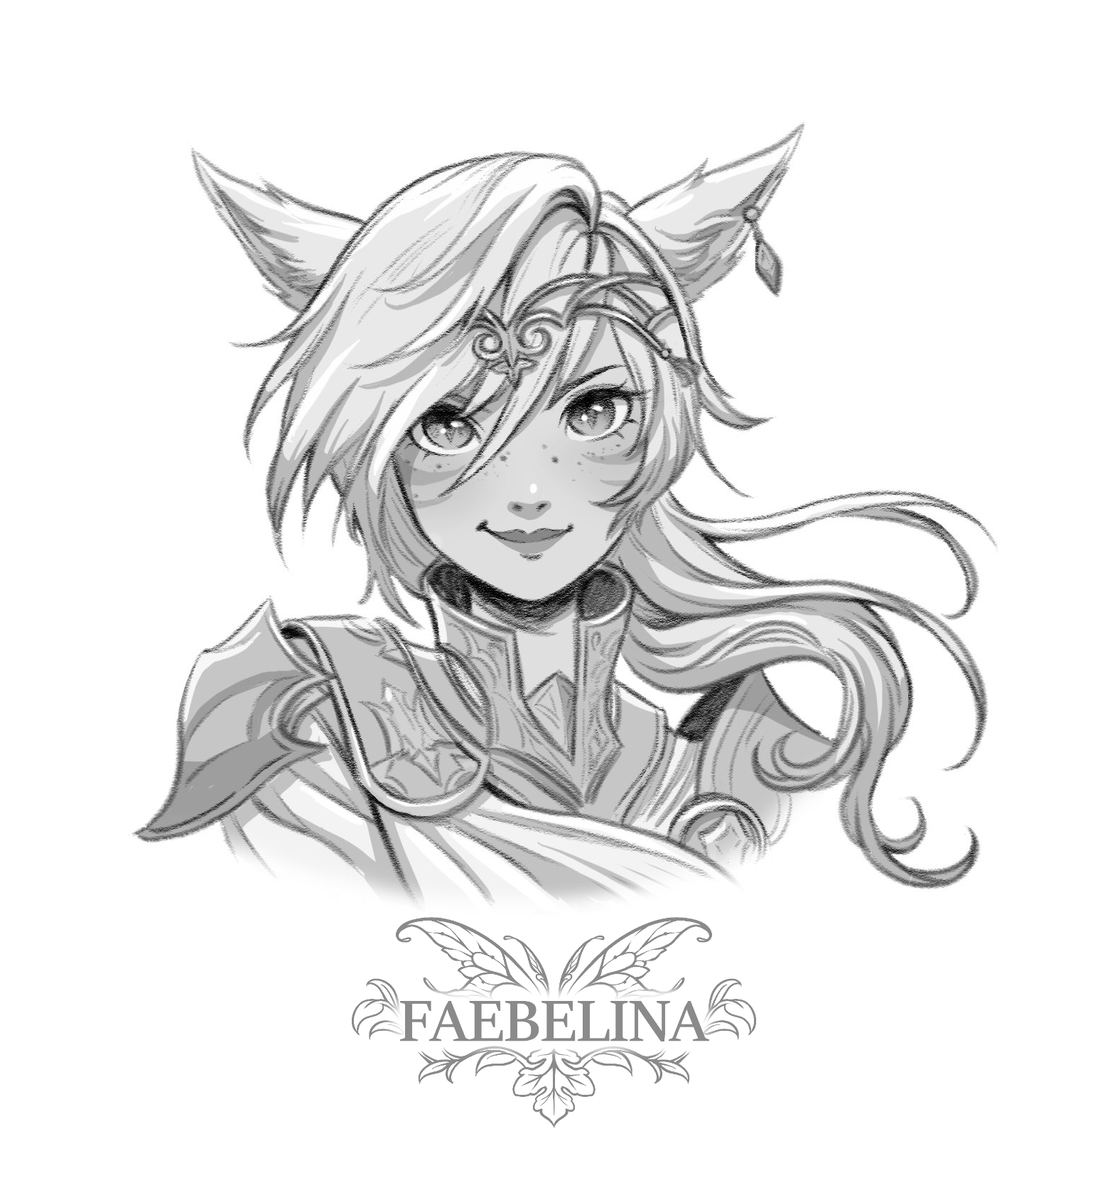 new profile pic :D Thank you @Faebelina . I am so happy to finally have some art of my WoL and it is perfect. <3